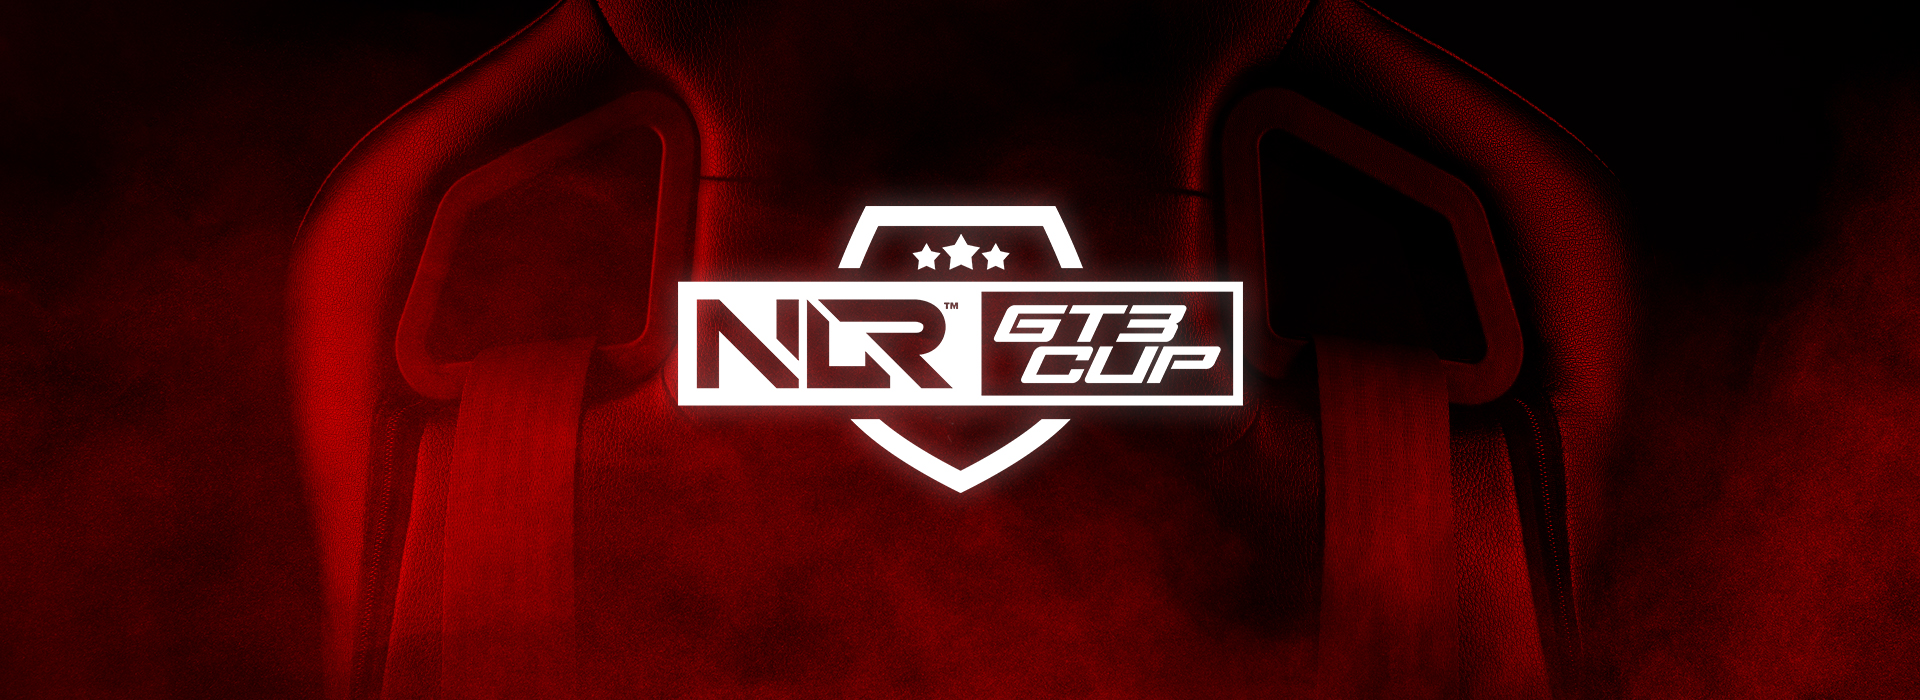 Nlr Cup Blog